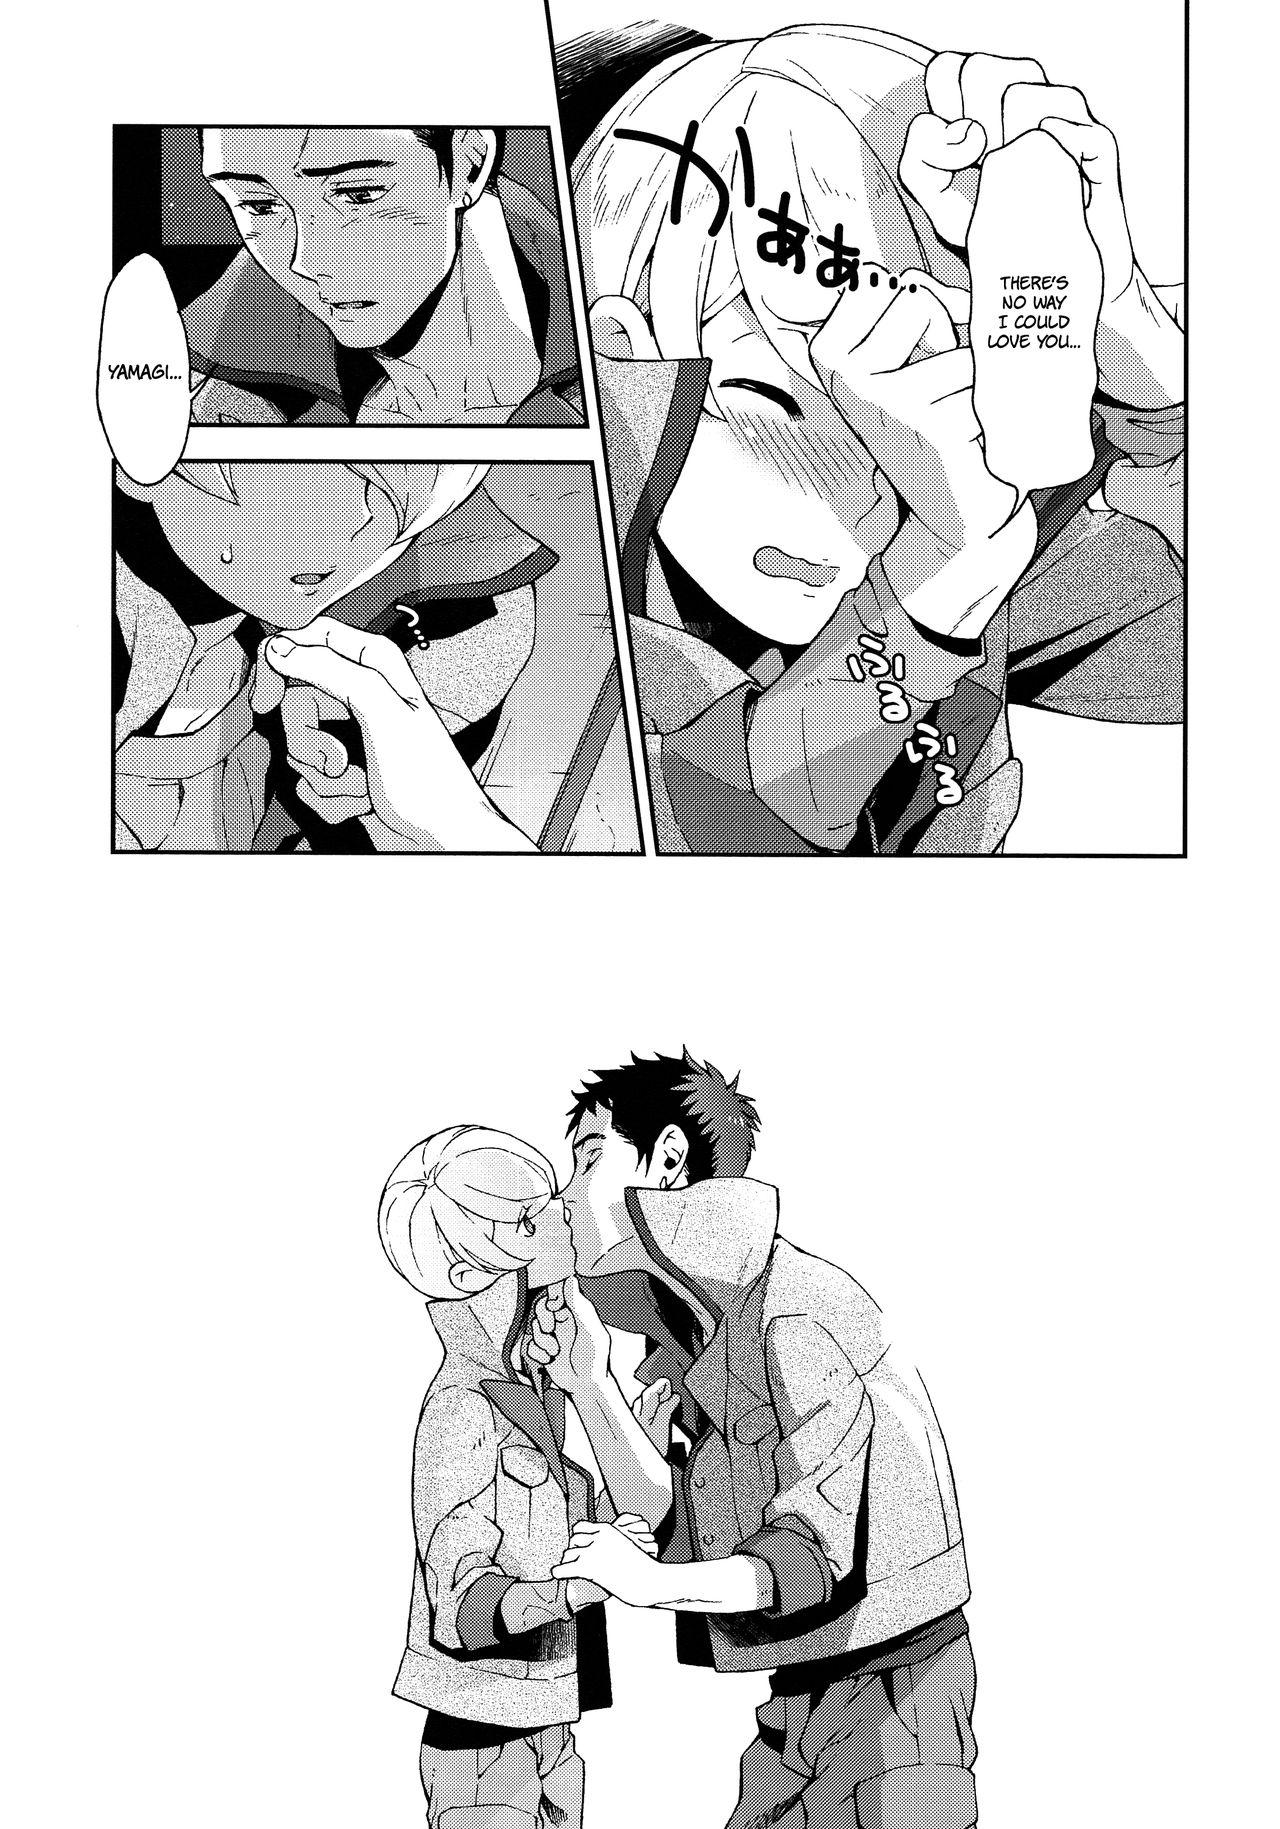 Old Vs Young i know U love me. - Mobile suit gundam tekketsu no orphans Closeups - Page 10